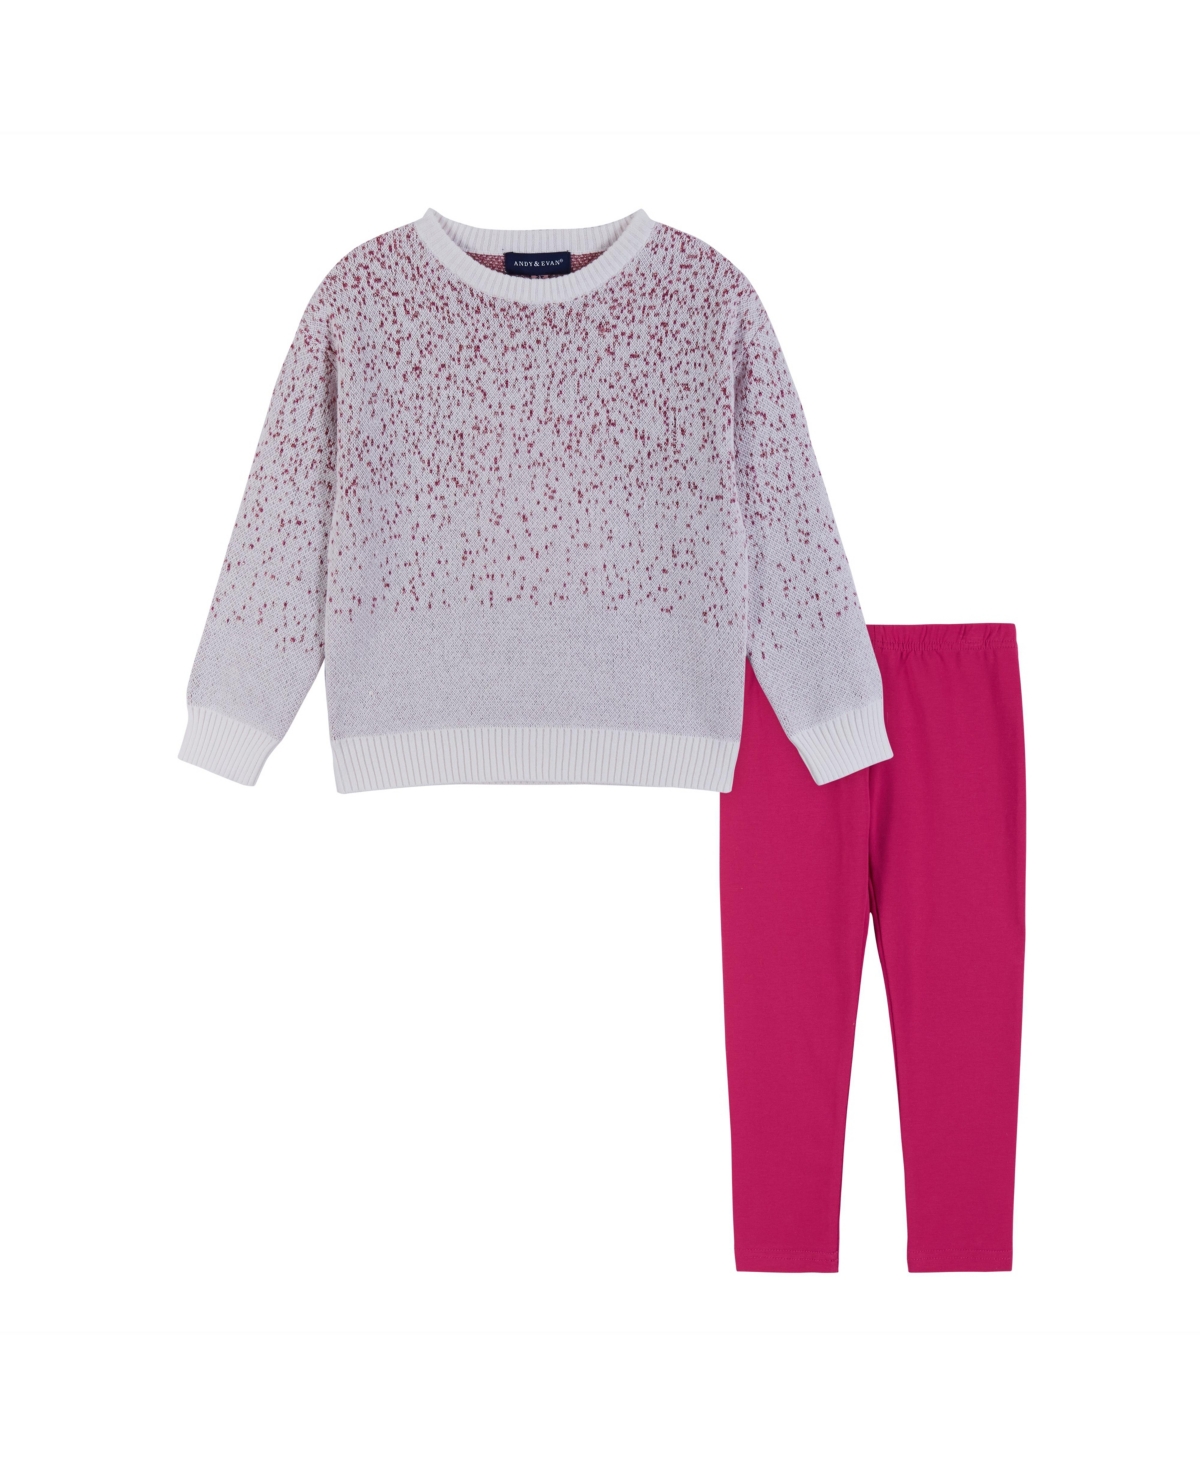 ANDY & EVAN TODDLER/CHILD GIRLS OMBRE SWEATER SET